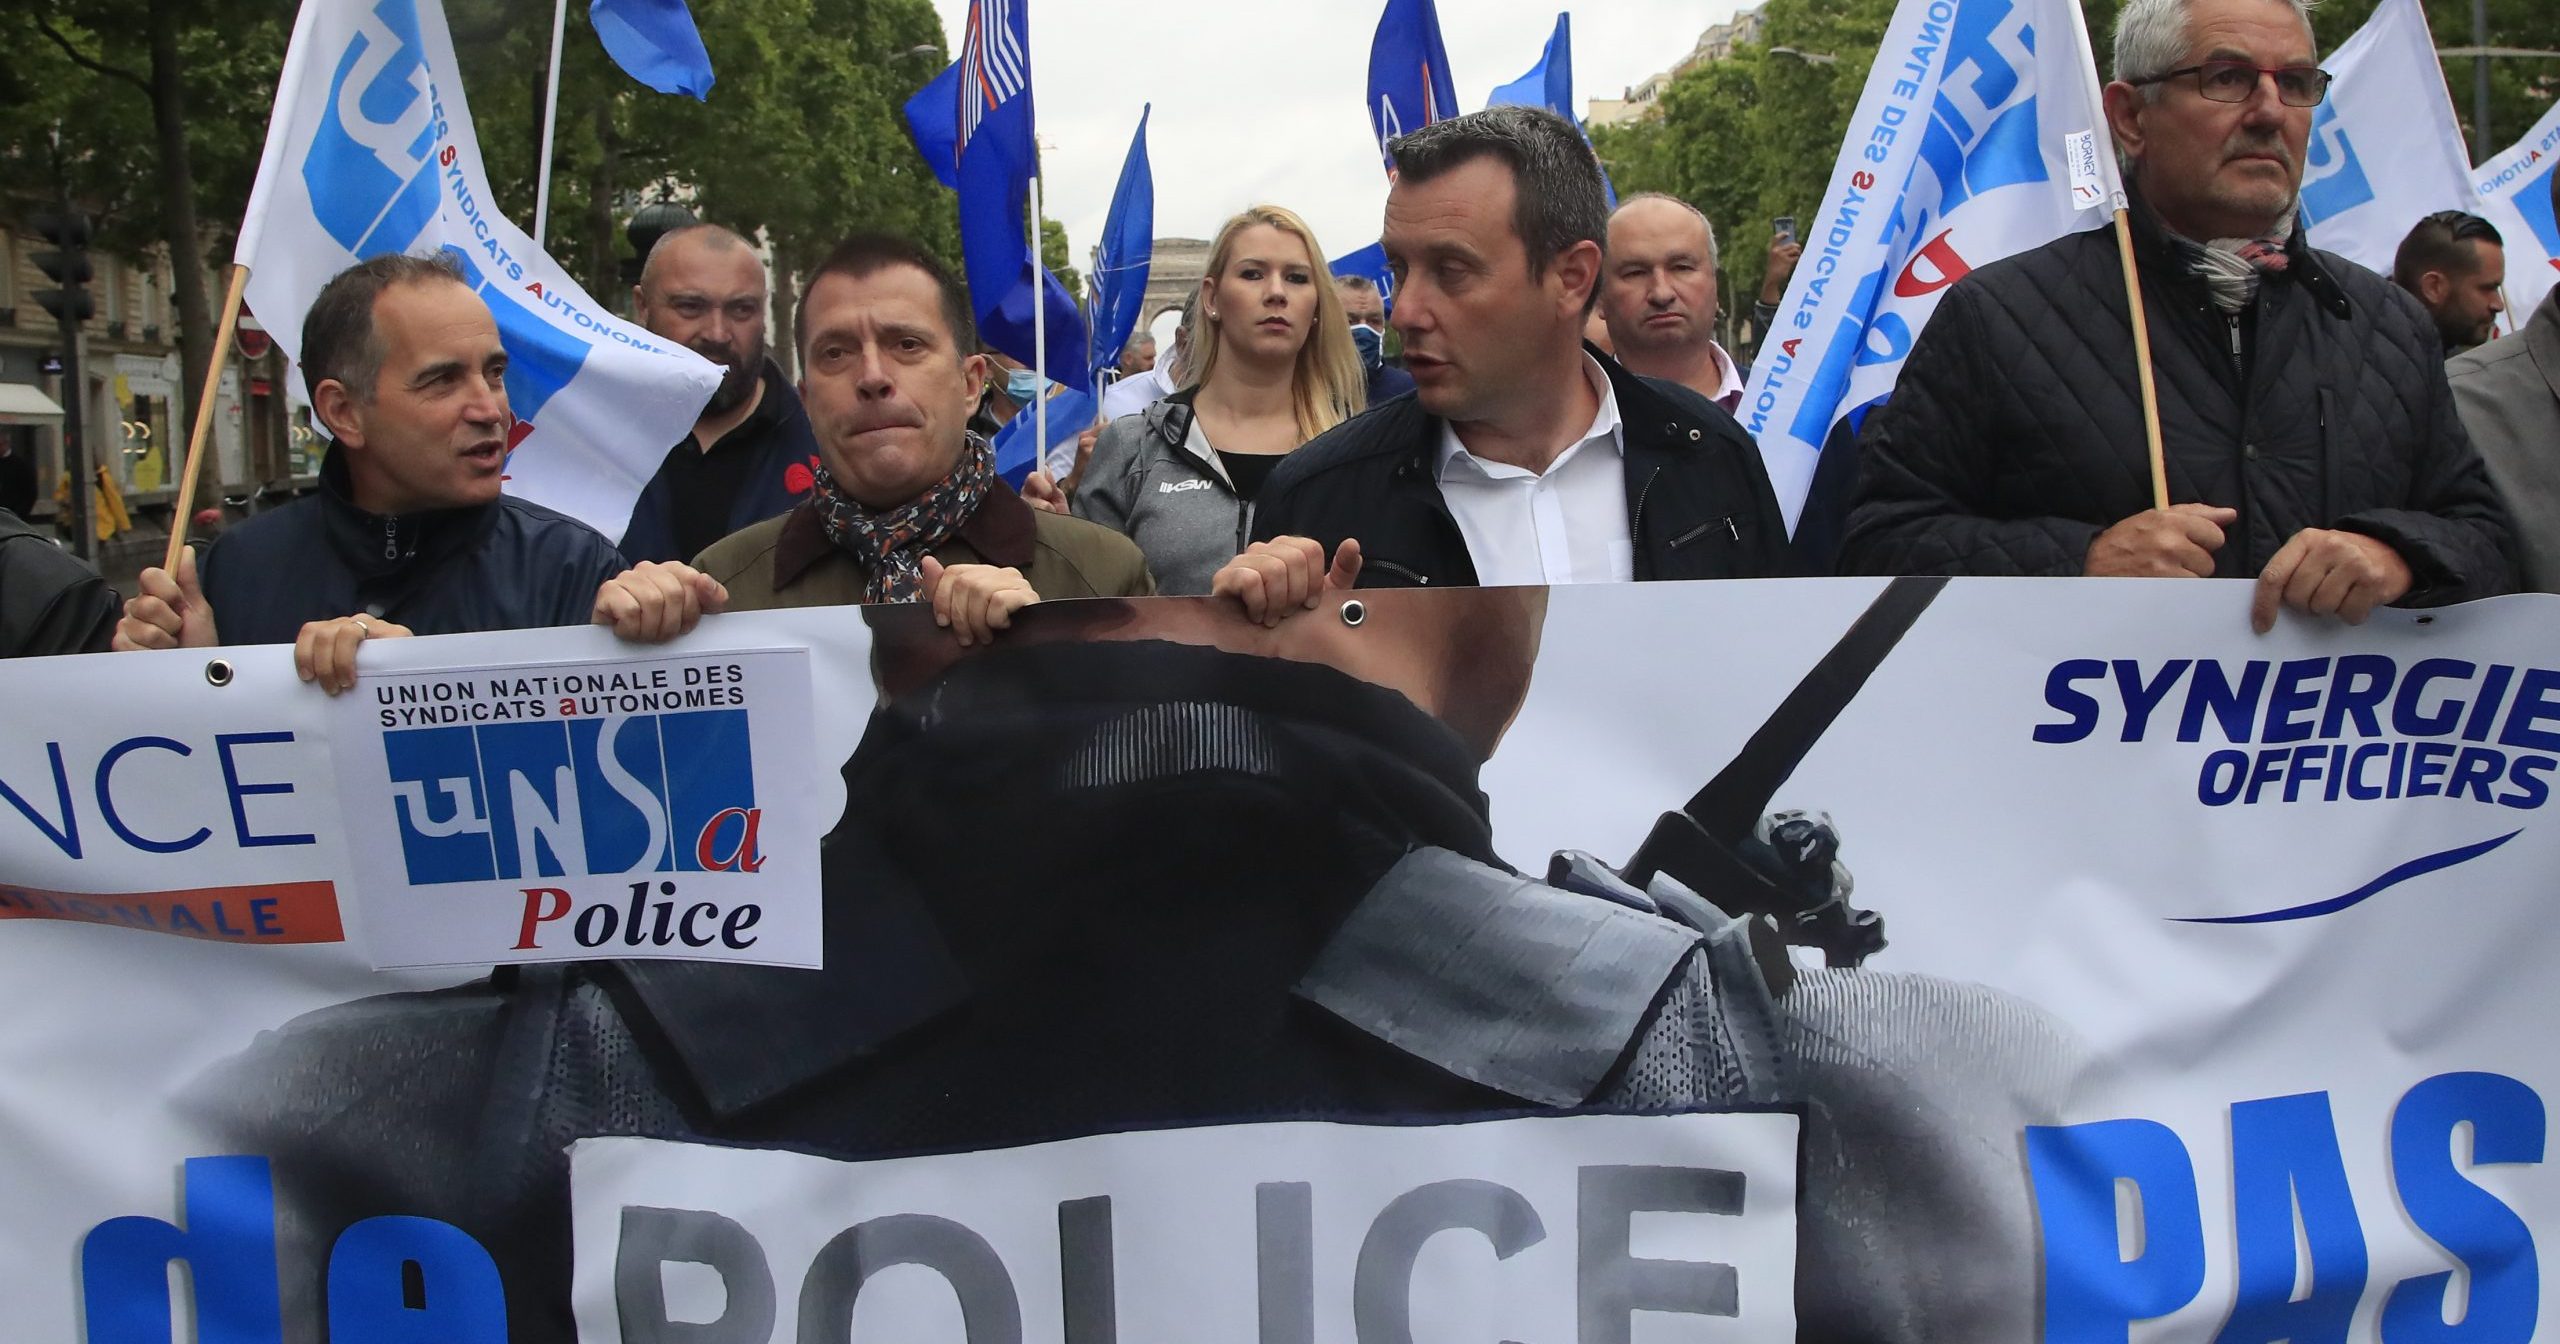 French police unionists demonstrate with a banner reading 'No police, no peace' on the Champs-Elysee avenue on June 12, 2020, in Paris. French police are protesting a new ban on chokeholds and implications of racism within their ranks.